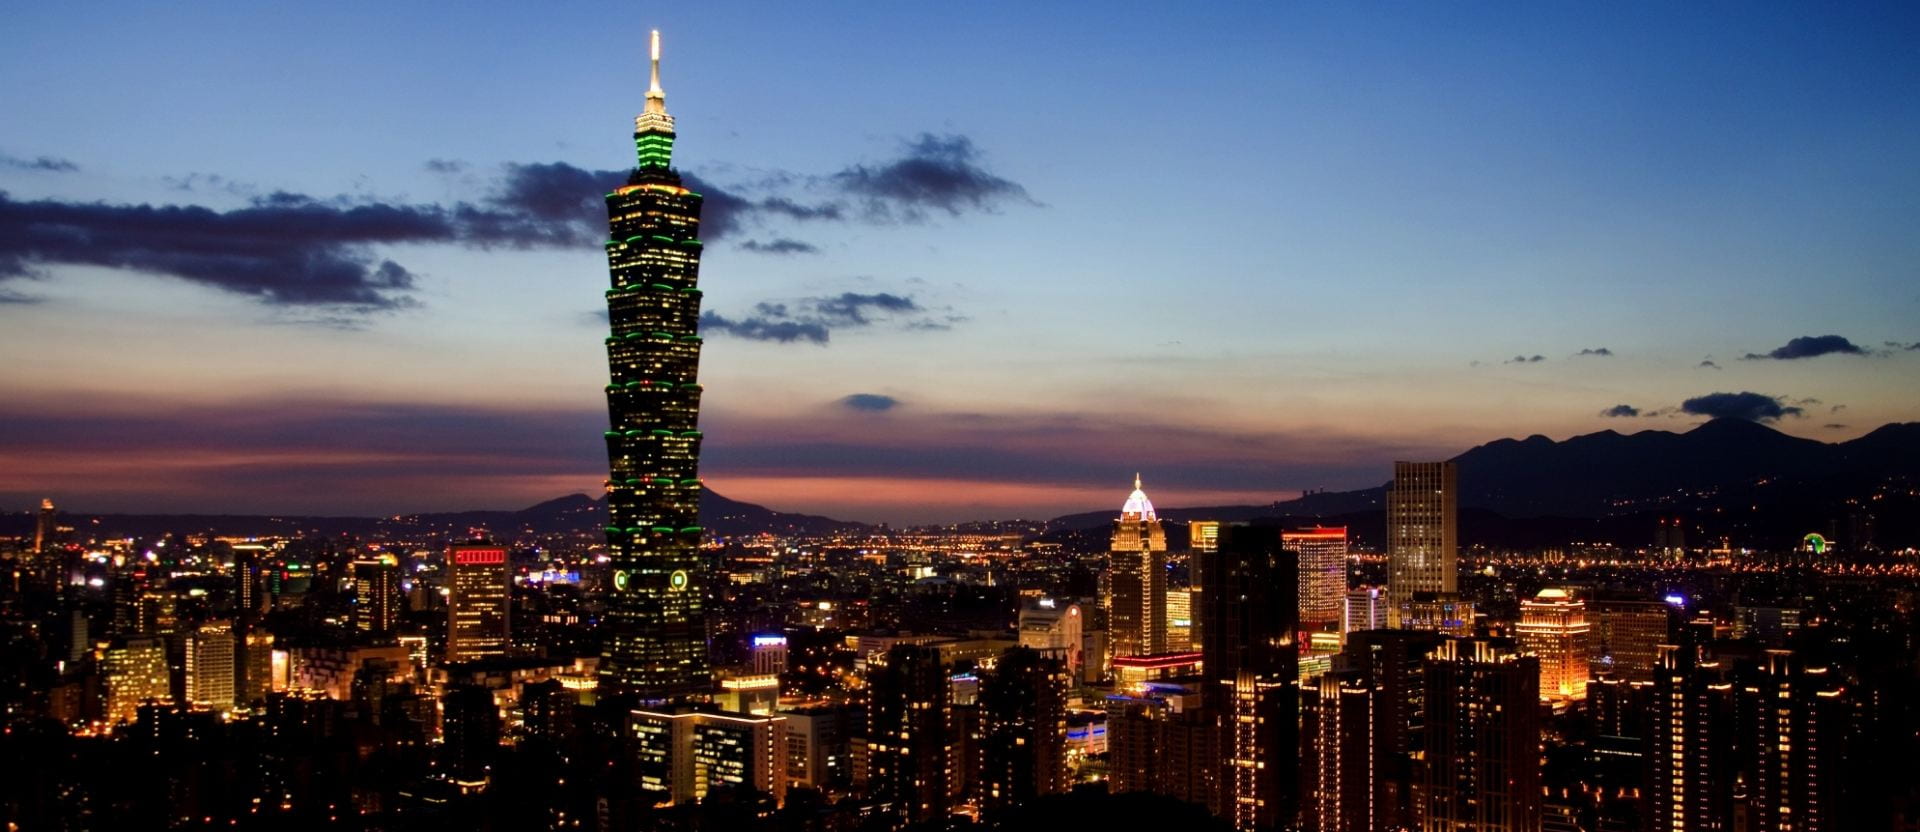 skyline of Taipei at dusk with buildings lit up